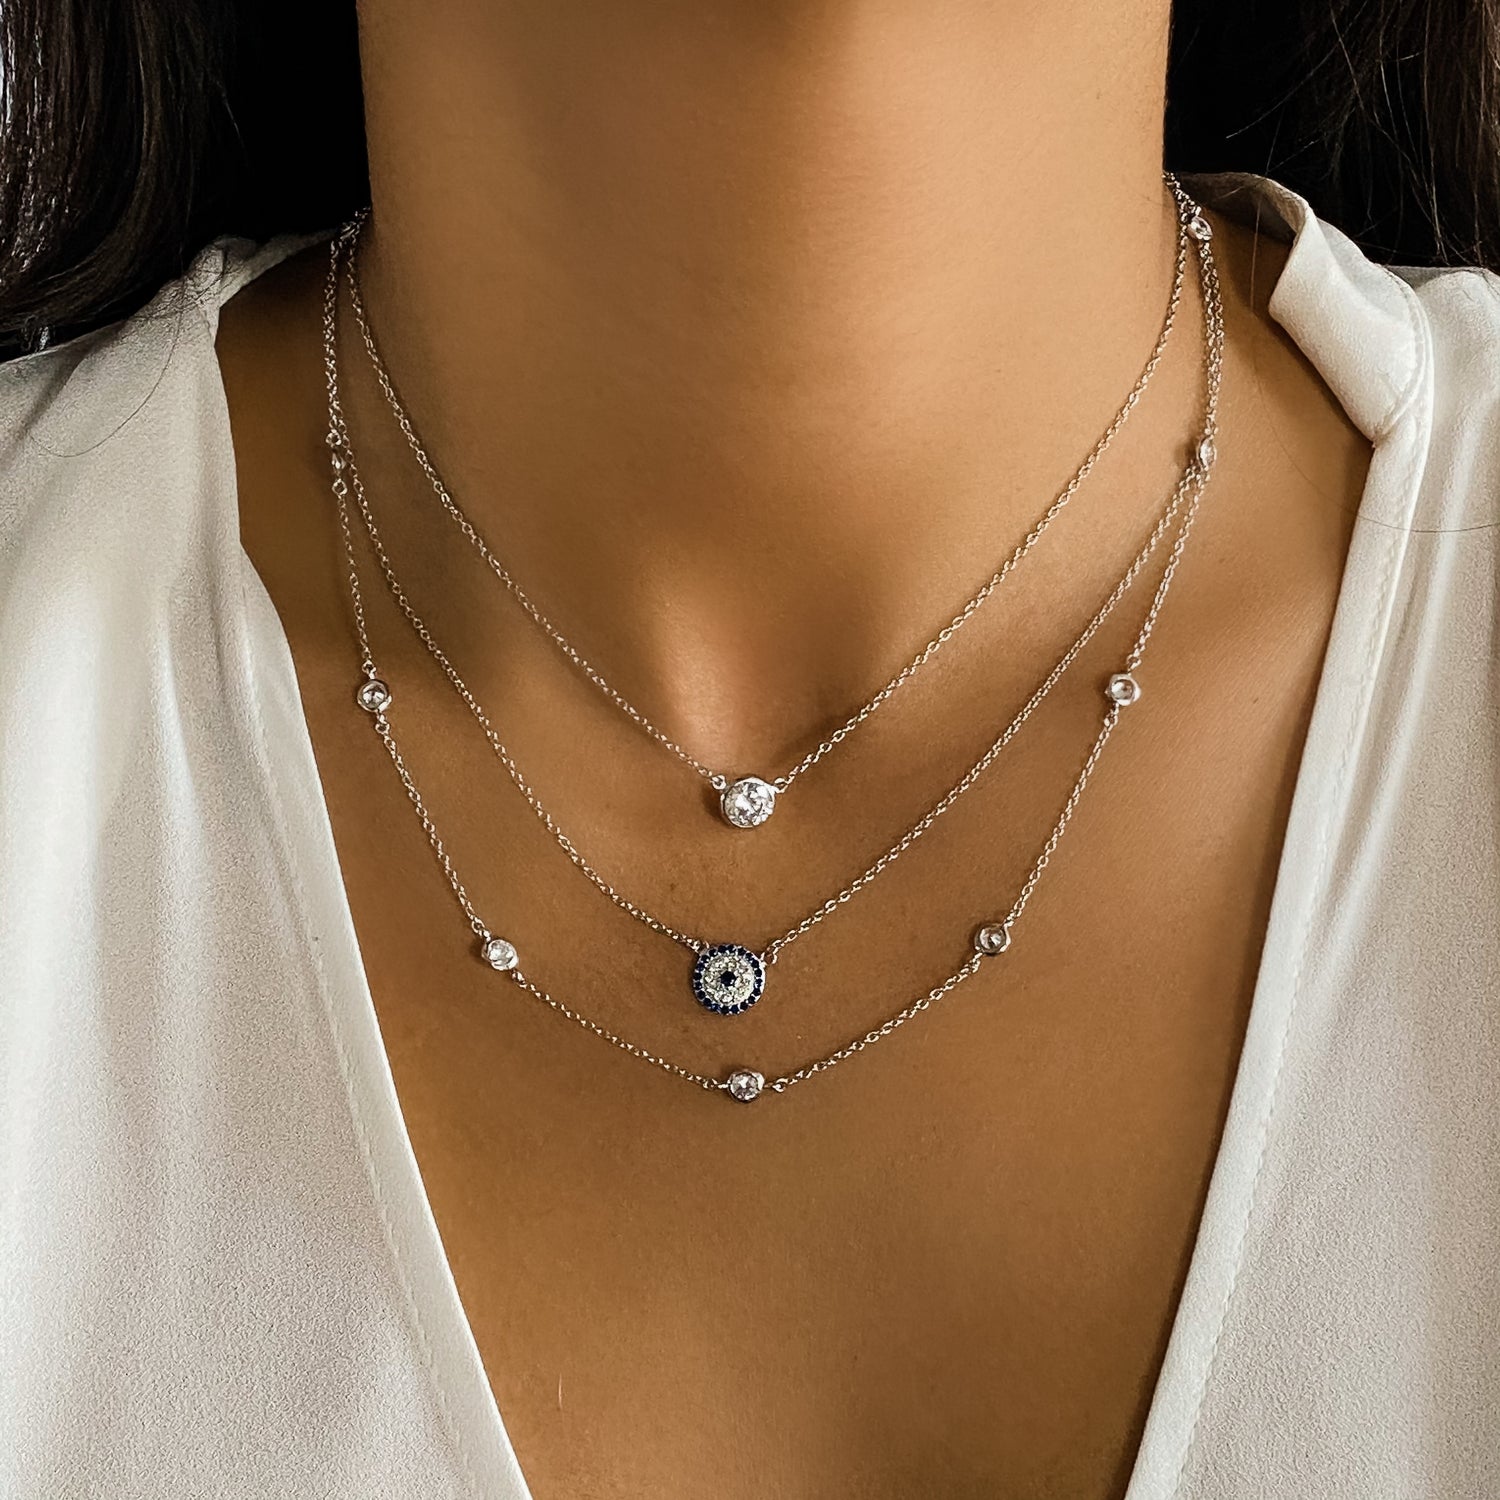 Layering three sterling silver and cz necklaces from Alexandra Marks Jewelry